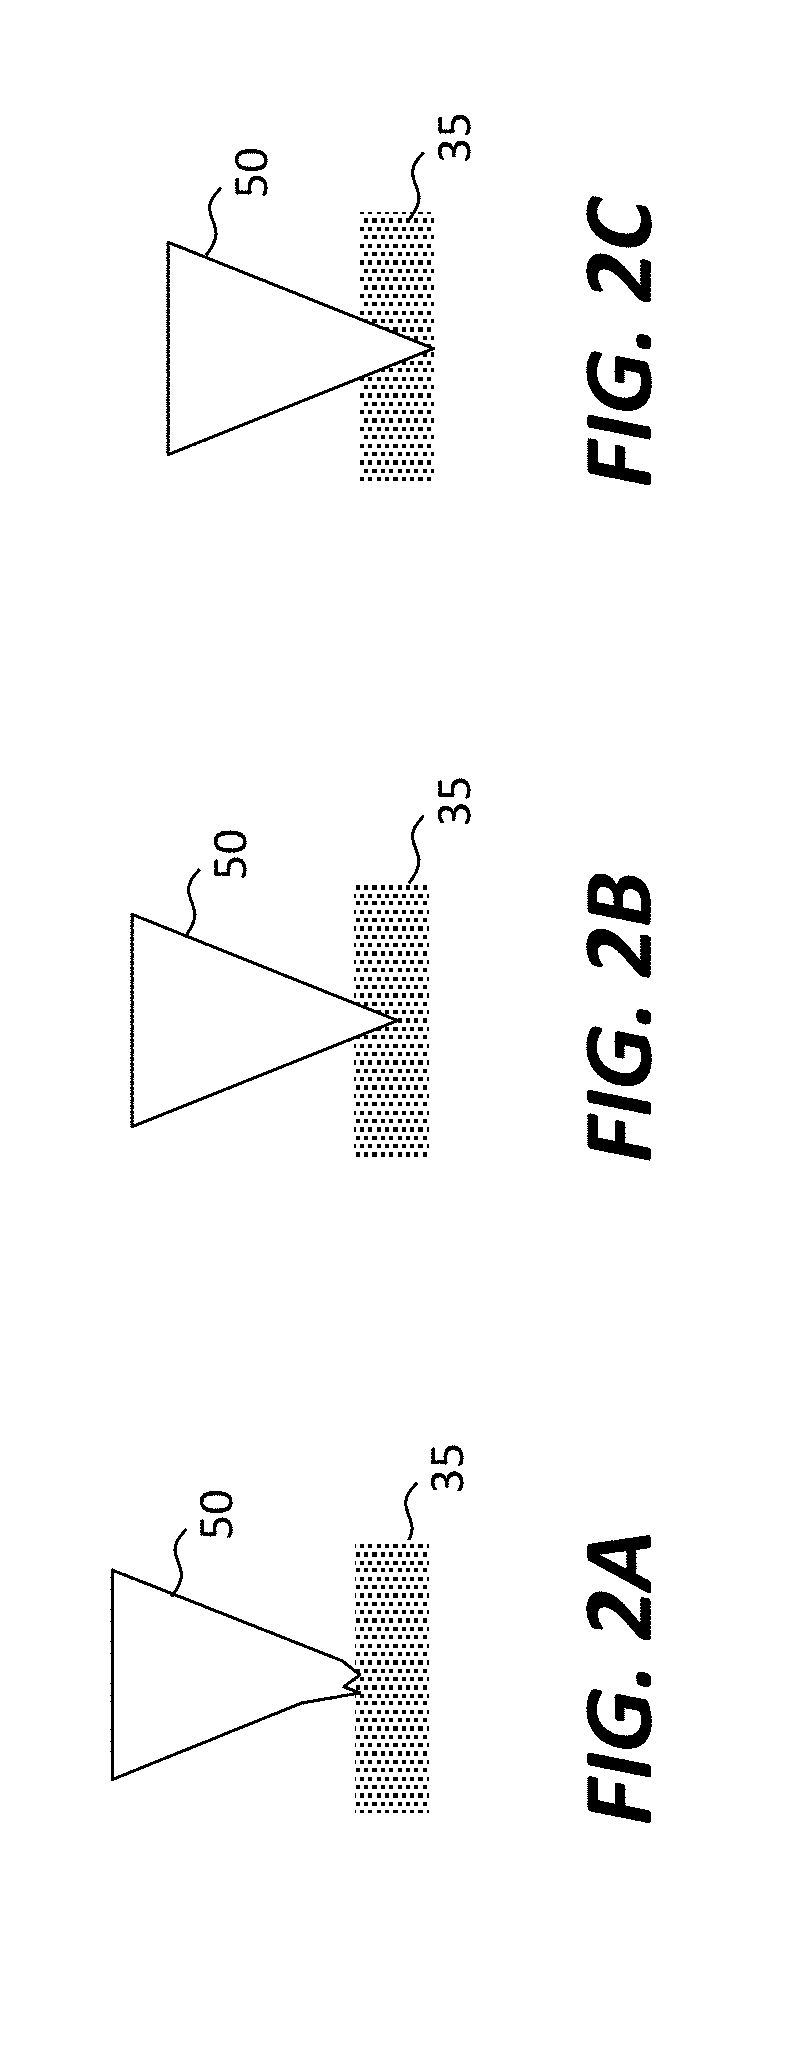 Antenna with micro-transfer-printed circuit element